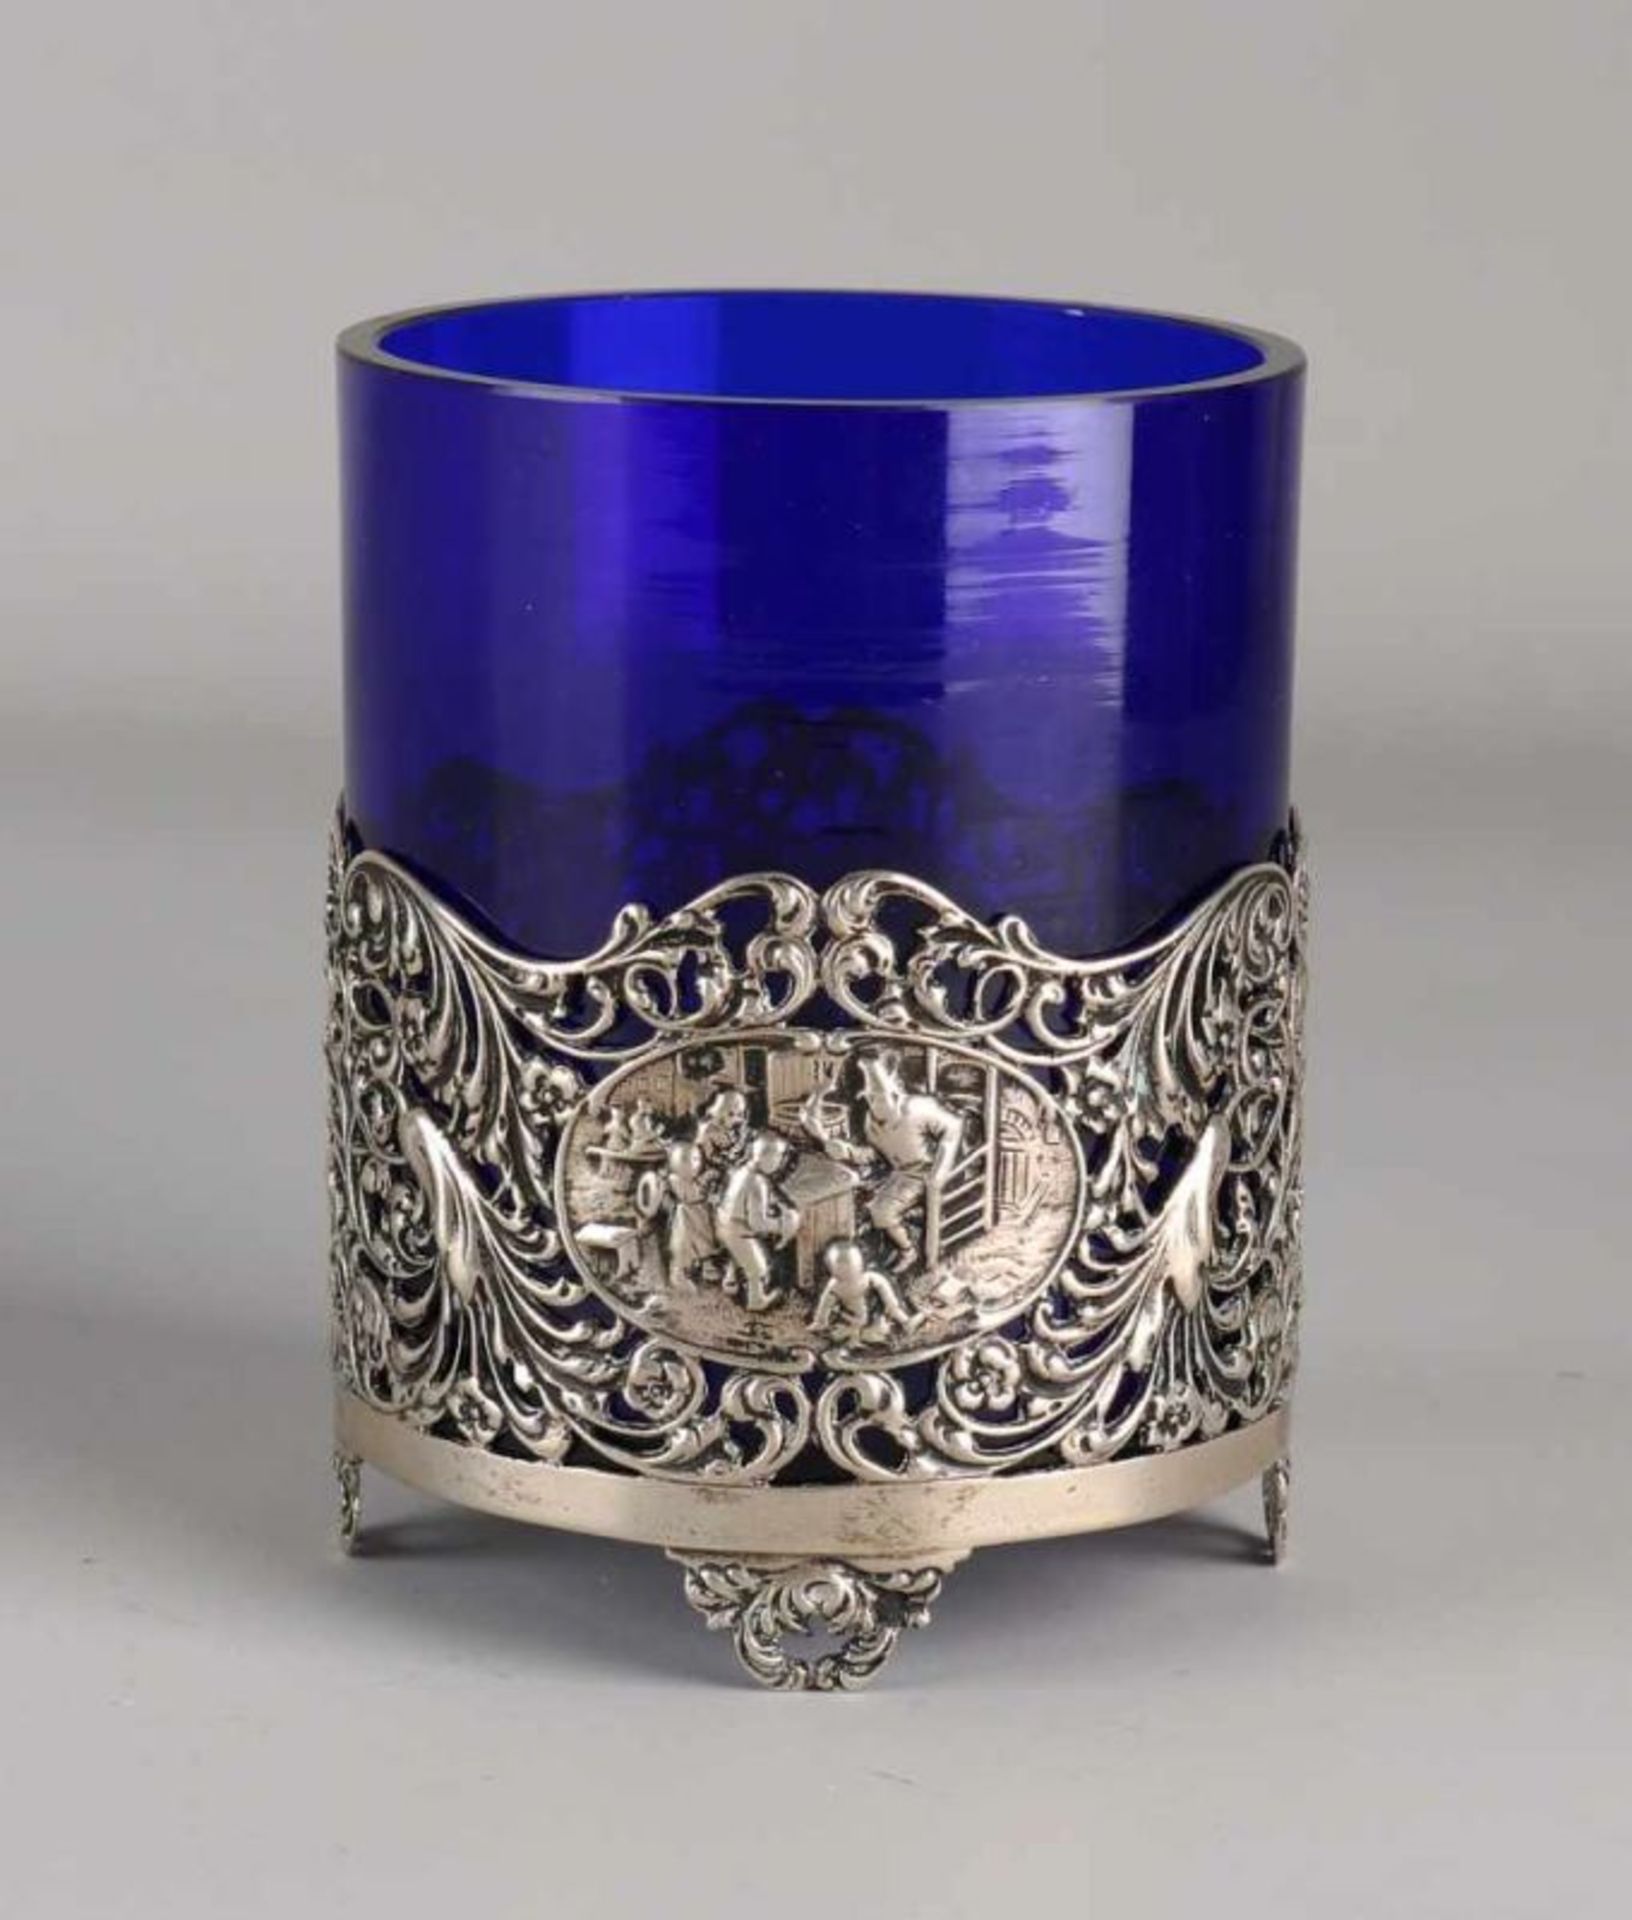 Silver holder, 835/000, with blue glass. Round holder with open-worked Biedermeier motif, flowers,